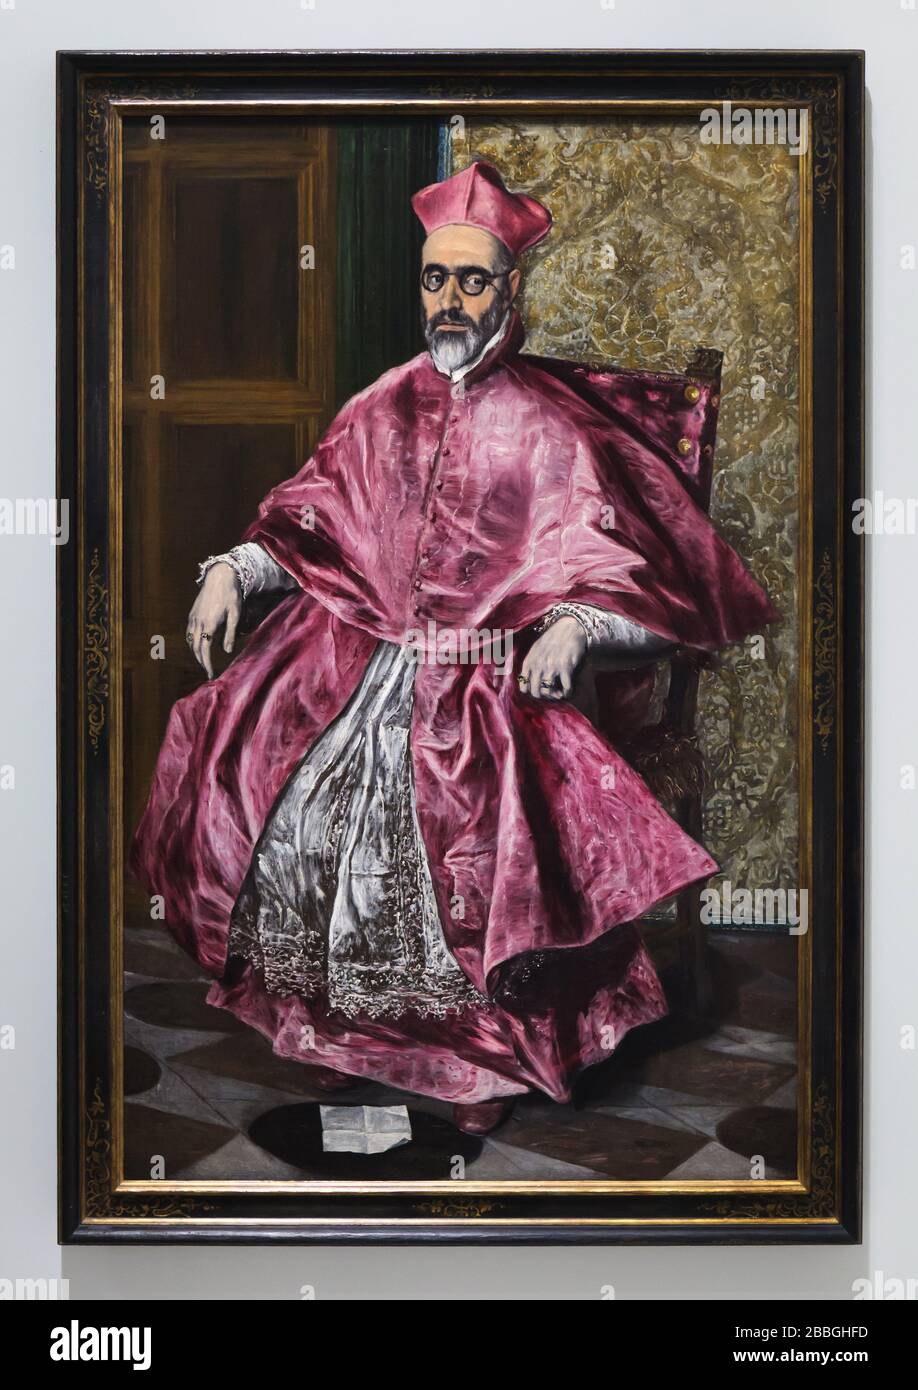 Paining 'Portrait of Fernando Niño de Guevara' by Spanish mannerist painter El Greco (1600) on display at his retrospective exhibition in the Grand Palais in Paris, France. The first major exhibition in France ever to be dedicated to El Greco runs till 20 February 2020. Stock Photo